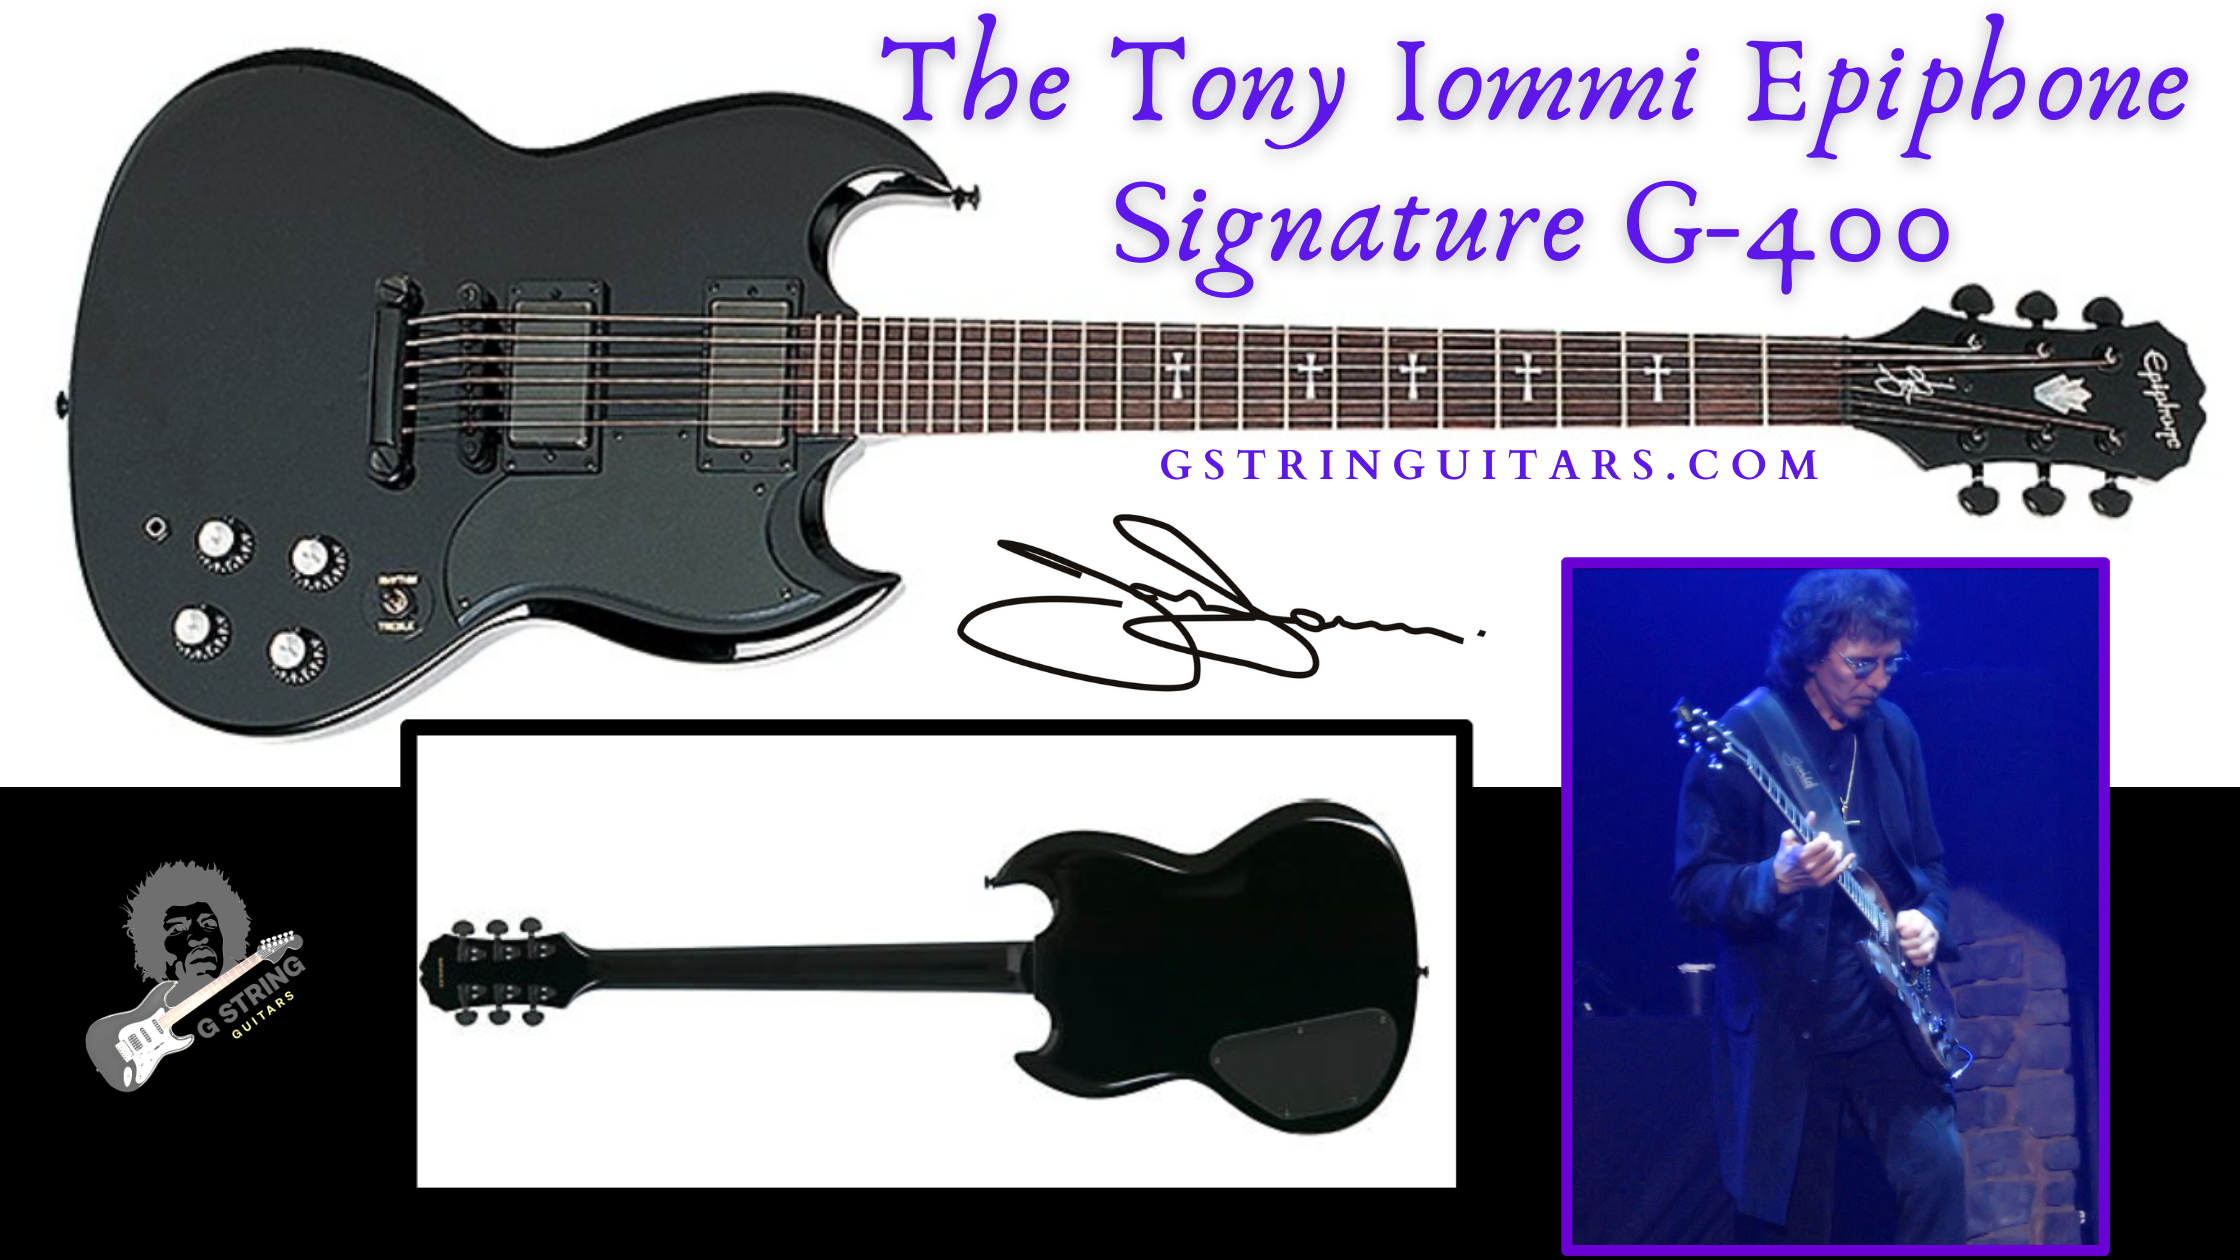 The Epiphone Tony Iommi Signature G 400 -Feature image of full guitar front and back with Artist playing live